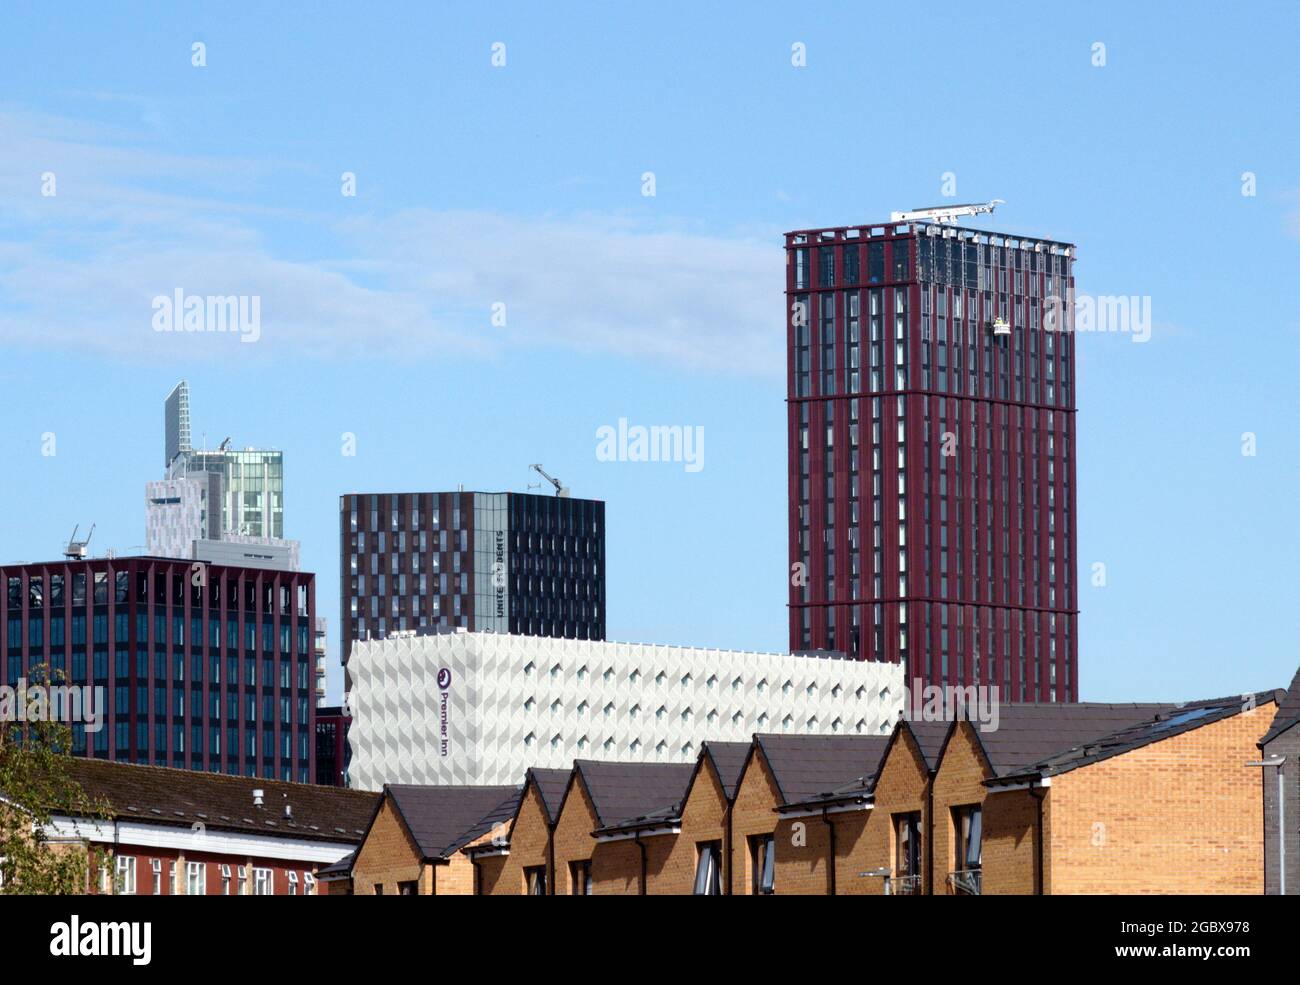 New skyscrapers or high rise buildings, with new houses in the foreground, in central Manchester, England, United Kingdom Stock Photo